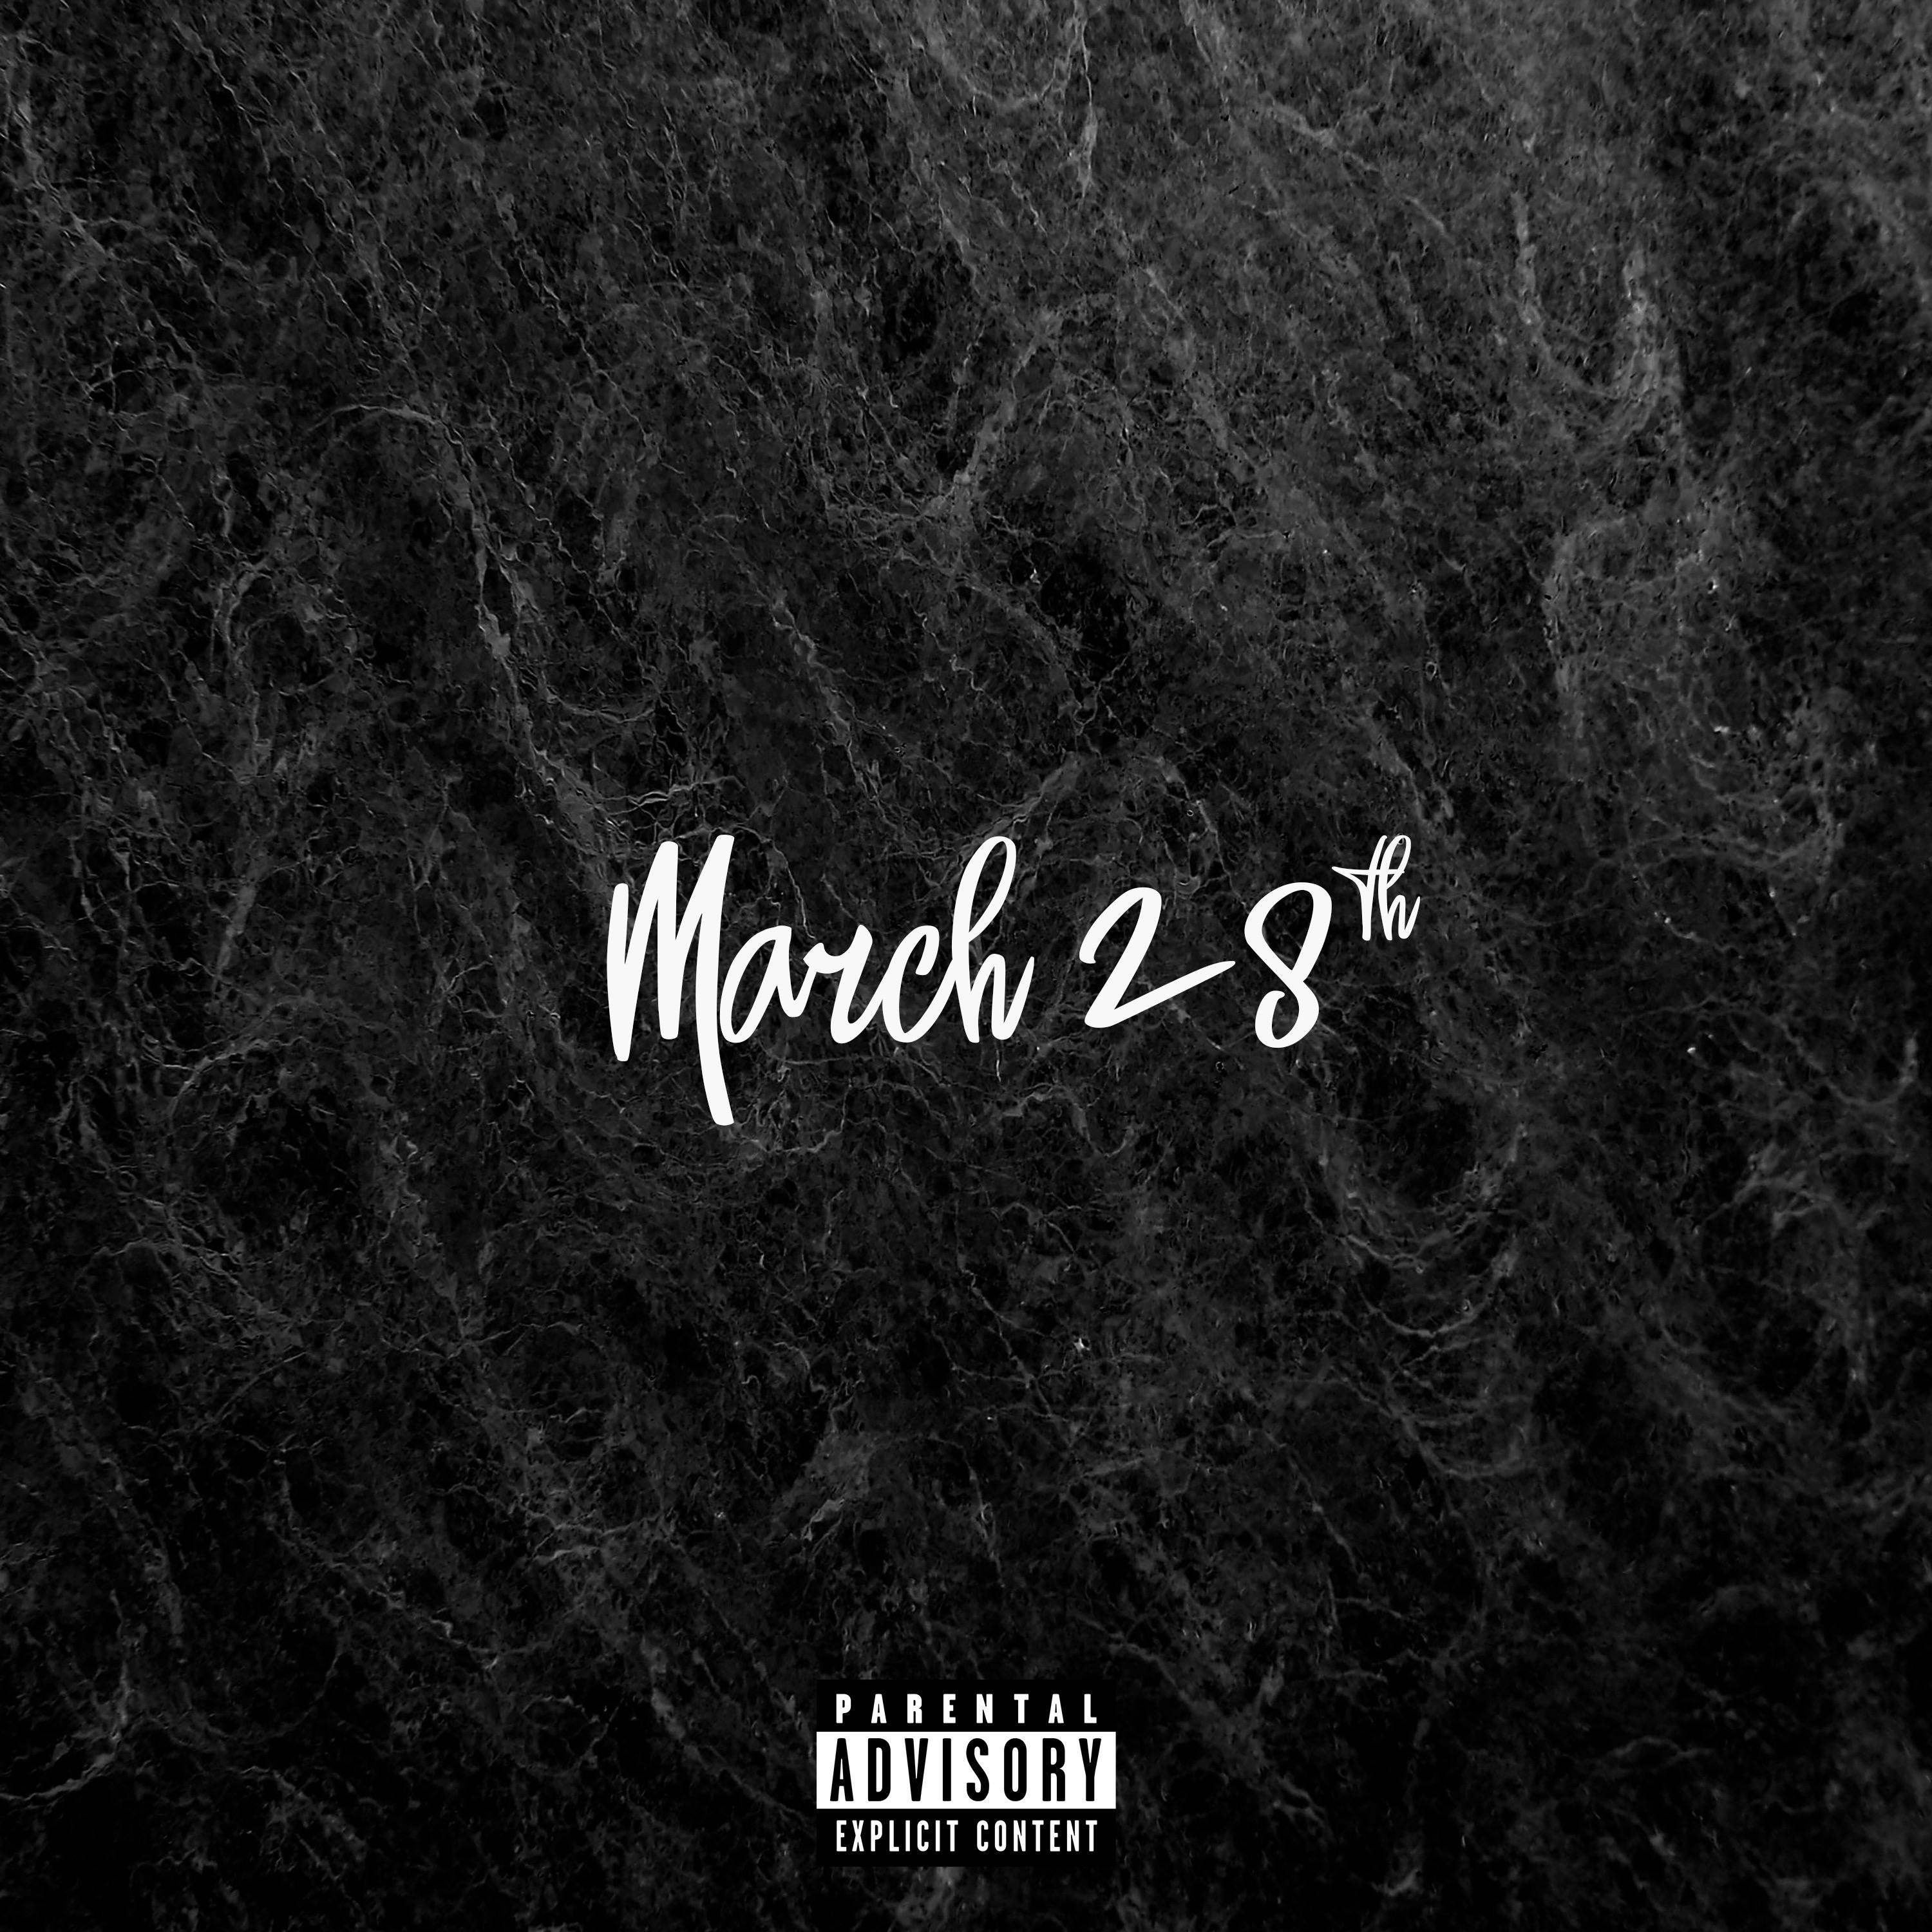 March 28th